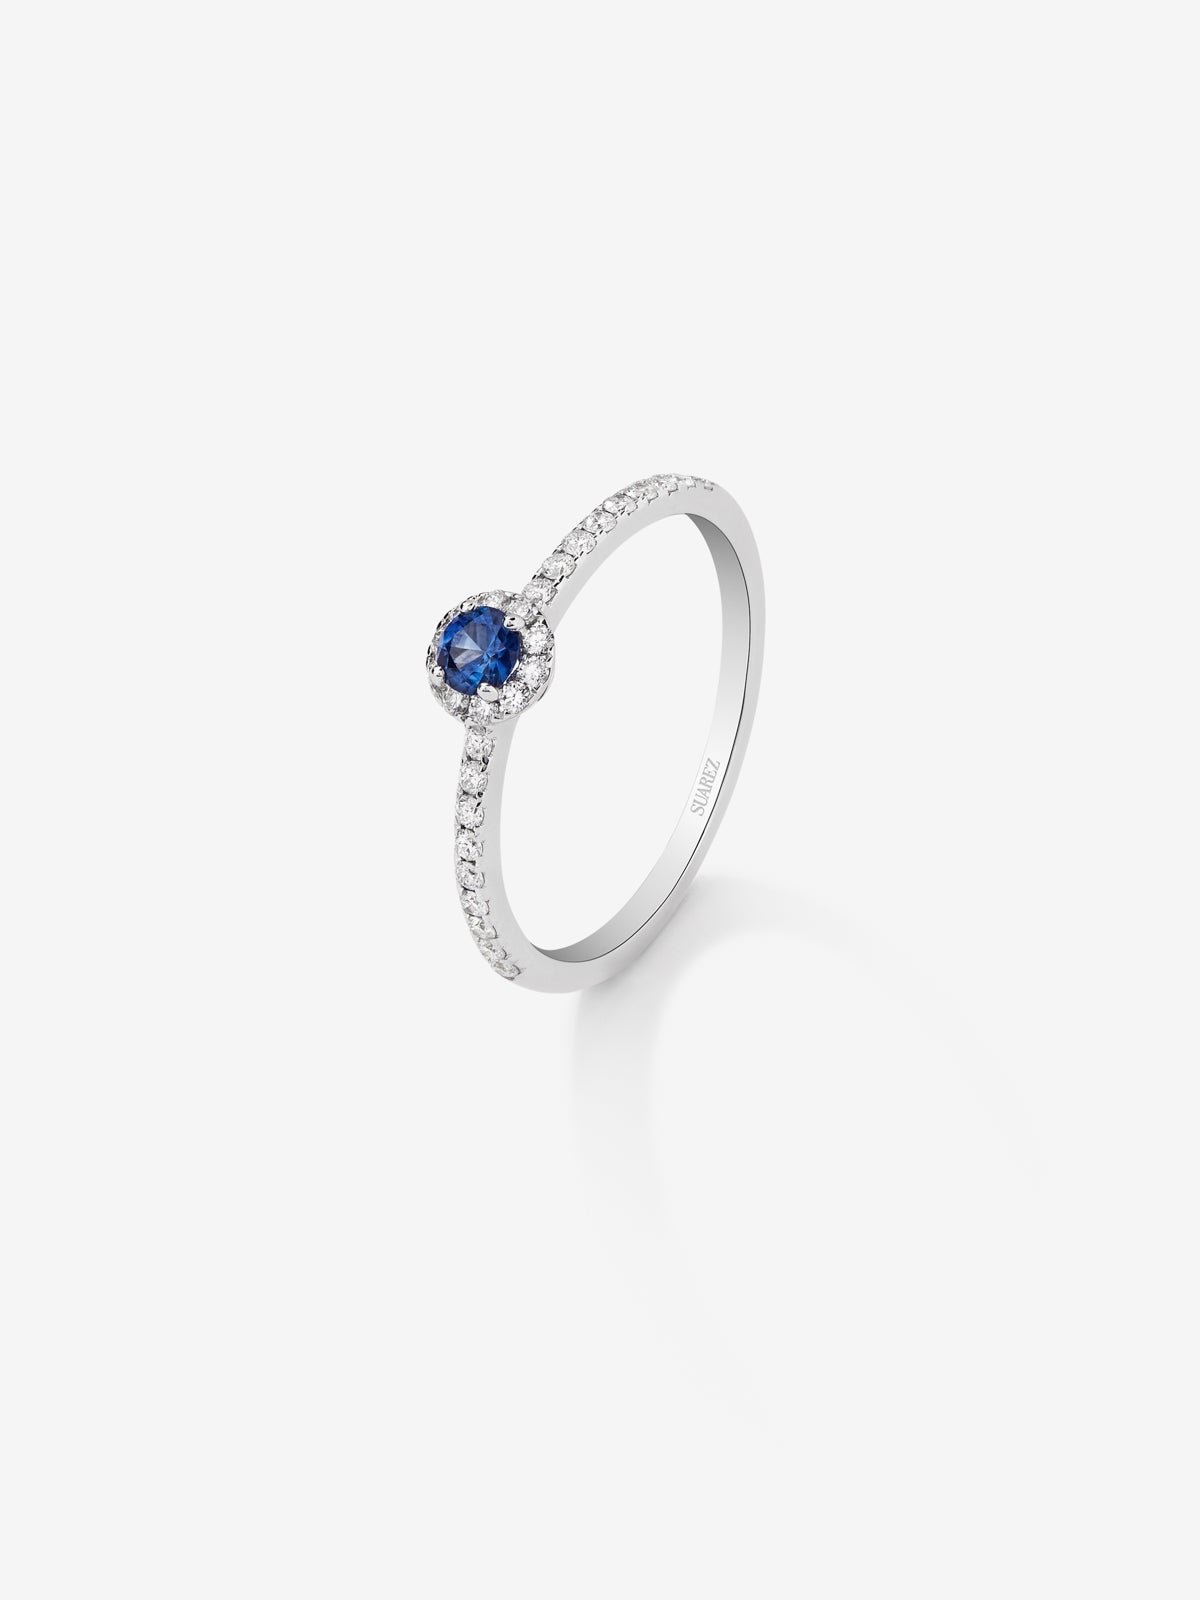 18K white gold ring with brilliant-cut blue sapphire of 0.26 cts and border and arm of 26 brilliant-cut diamonds with a total of 0.26 cts